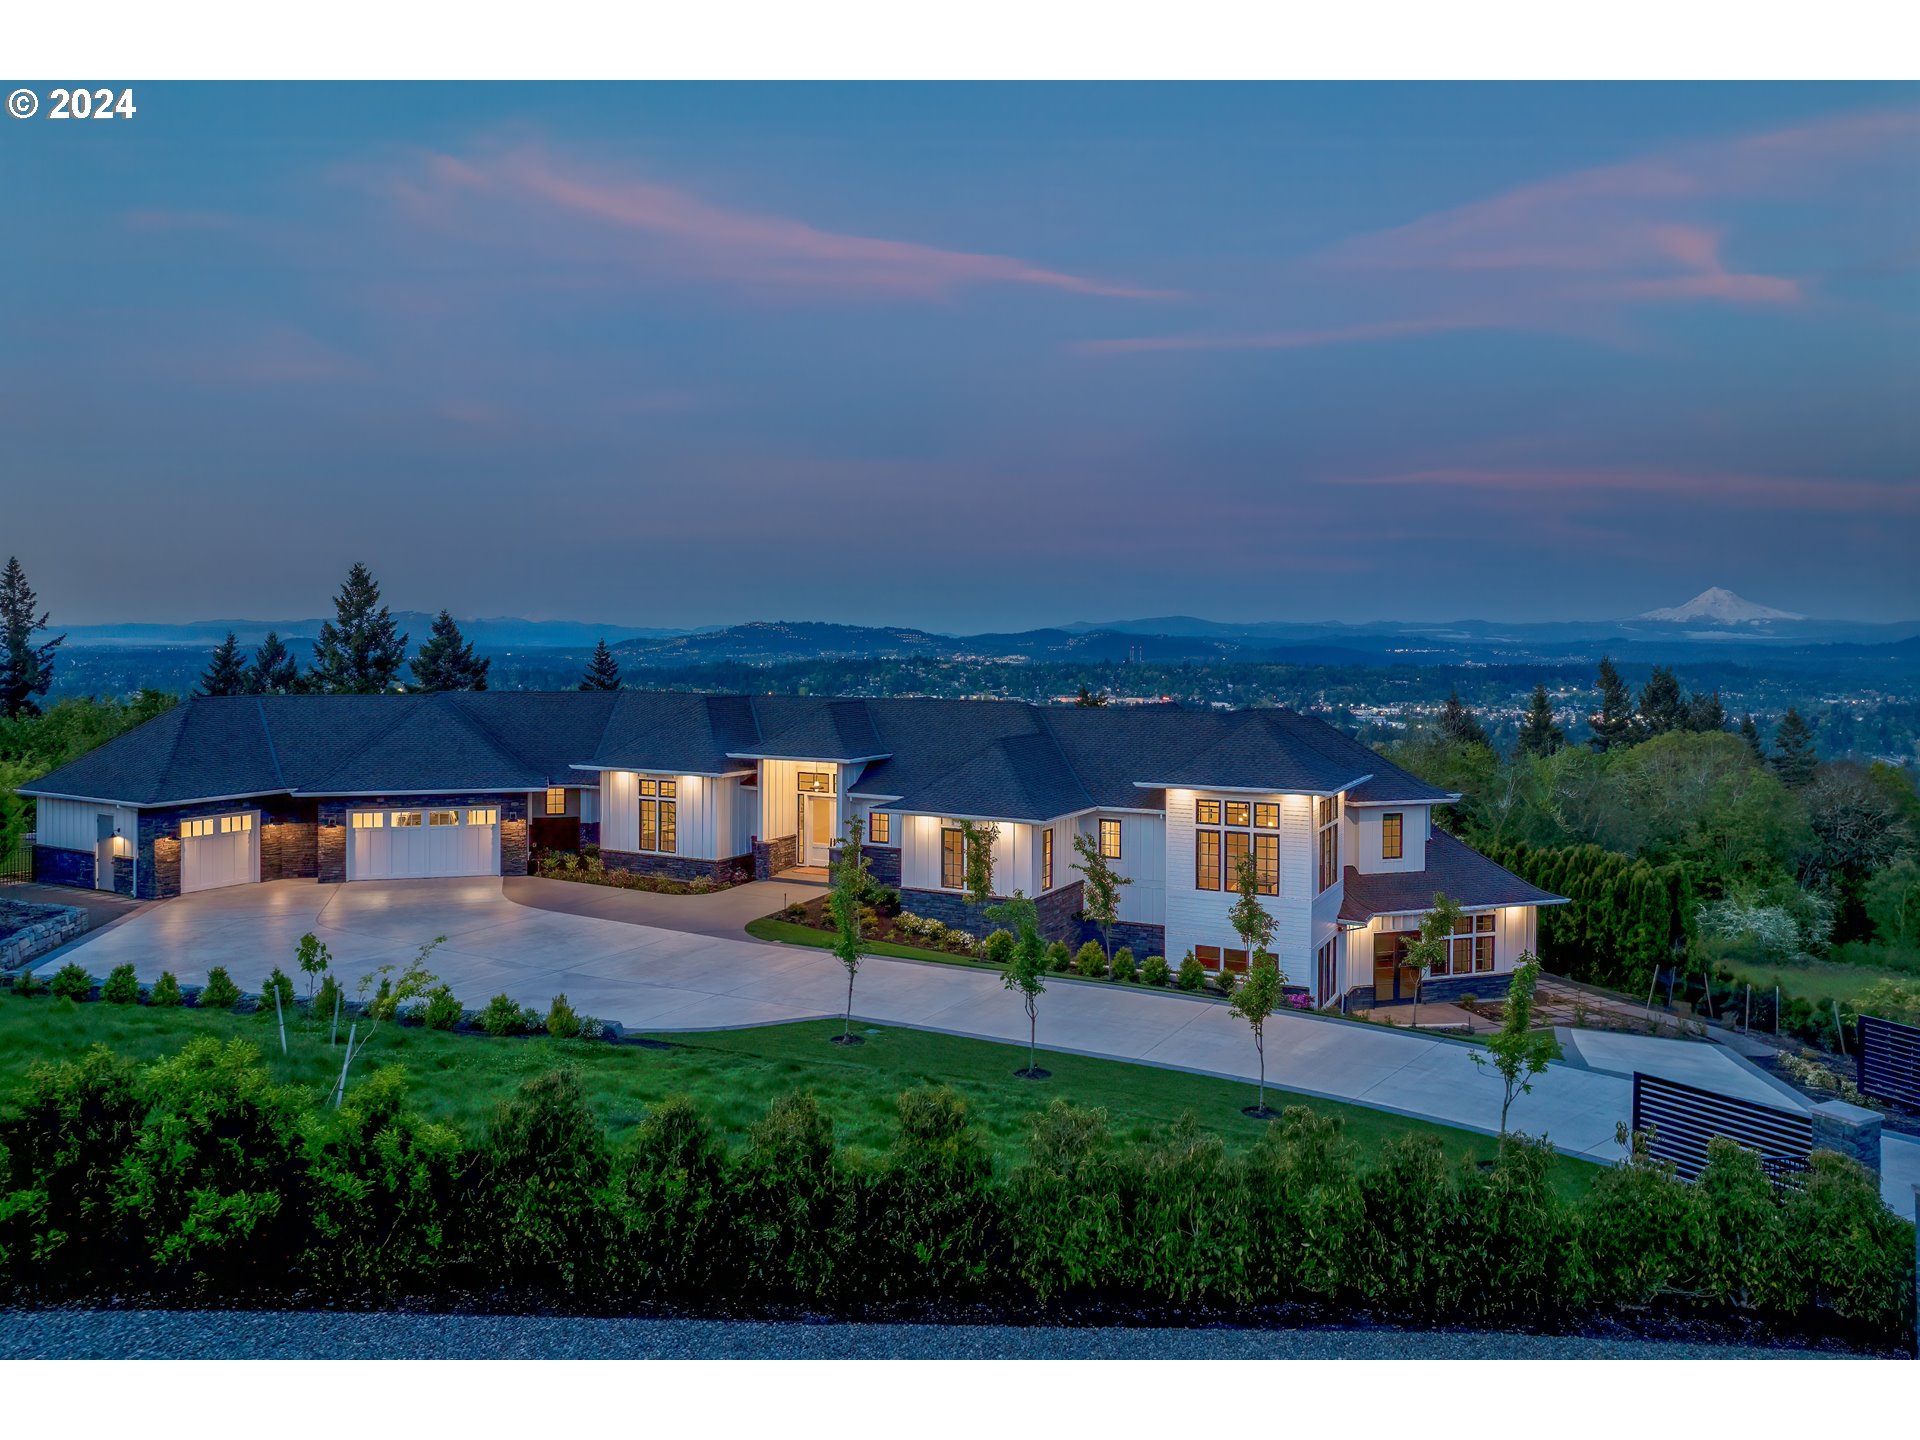 Indulge in luxury living in Lake Oswego's prestigious Skylands neighborhood, where this exquisite Contemporary estate boasts effortless elegance and breathtaking panoramic views of the Pacific Northwest's natural beauty. From the grand soaring ceilings to the expansive windows framing the view, this meticulously designed home invites you to immerse yourself in timeless elegance. Entertain in the gourmet kitchen with top-of-the-line appliances and spacious central island, while the show-stopping living room with its ceiling-height stone fireplace offers a picturesque backdrop for gatherings. Retreat to the serene, main-floor primary suite, complete with a light-filled office, gas fireplace, and spa-like ensuite bath. Downstairs, the expansive family room opens to a covered patio, perfect for outdoor entertaining year-round, while the newly installed sport court provides additional opportunities for recreation and play. With over 1,460 square feet of unfinished space, the possibilities for customization are endless. Located in the coveted Skylands neighborhood, residents enjoy convenient access to downtown Lake Oswego's amenities and highly-ranked schools.